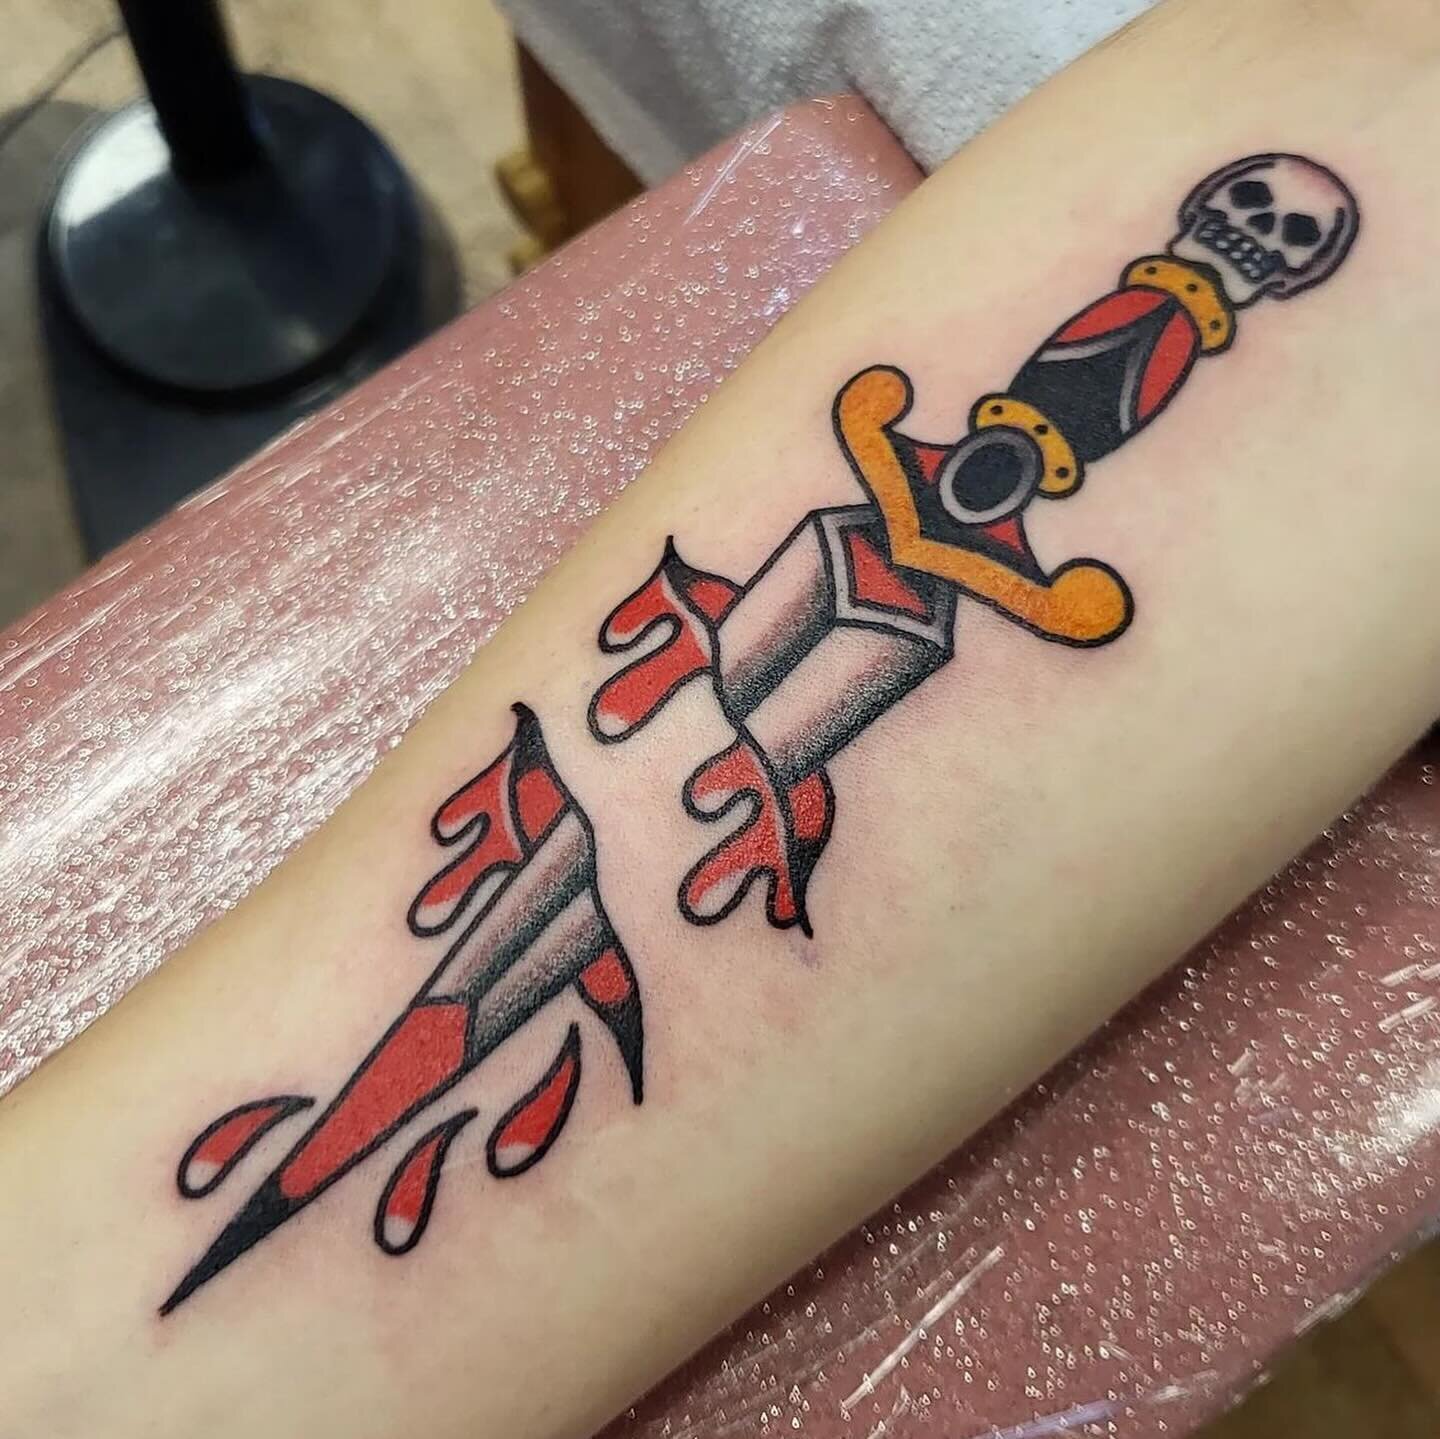 some dagger action 🗡️🗡️

made by: @jewelsidette - to book with Jewels, e-mail jewels.tattoo@gmail.com! 😎

#stabber #daggertattoo #ouchy